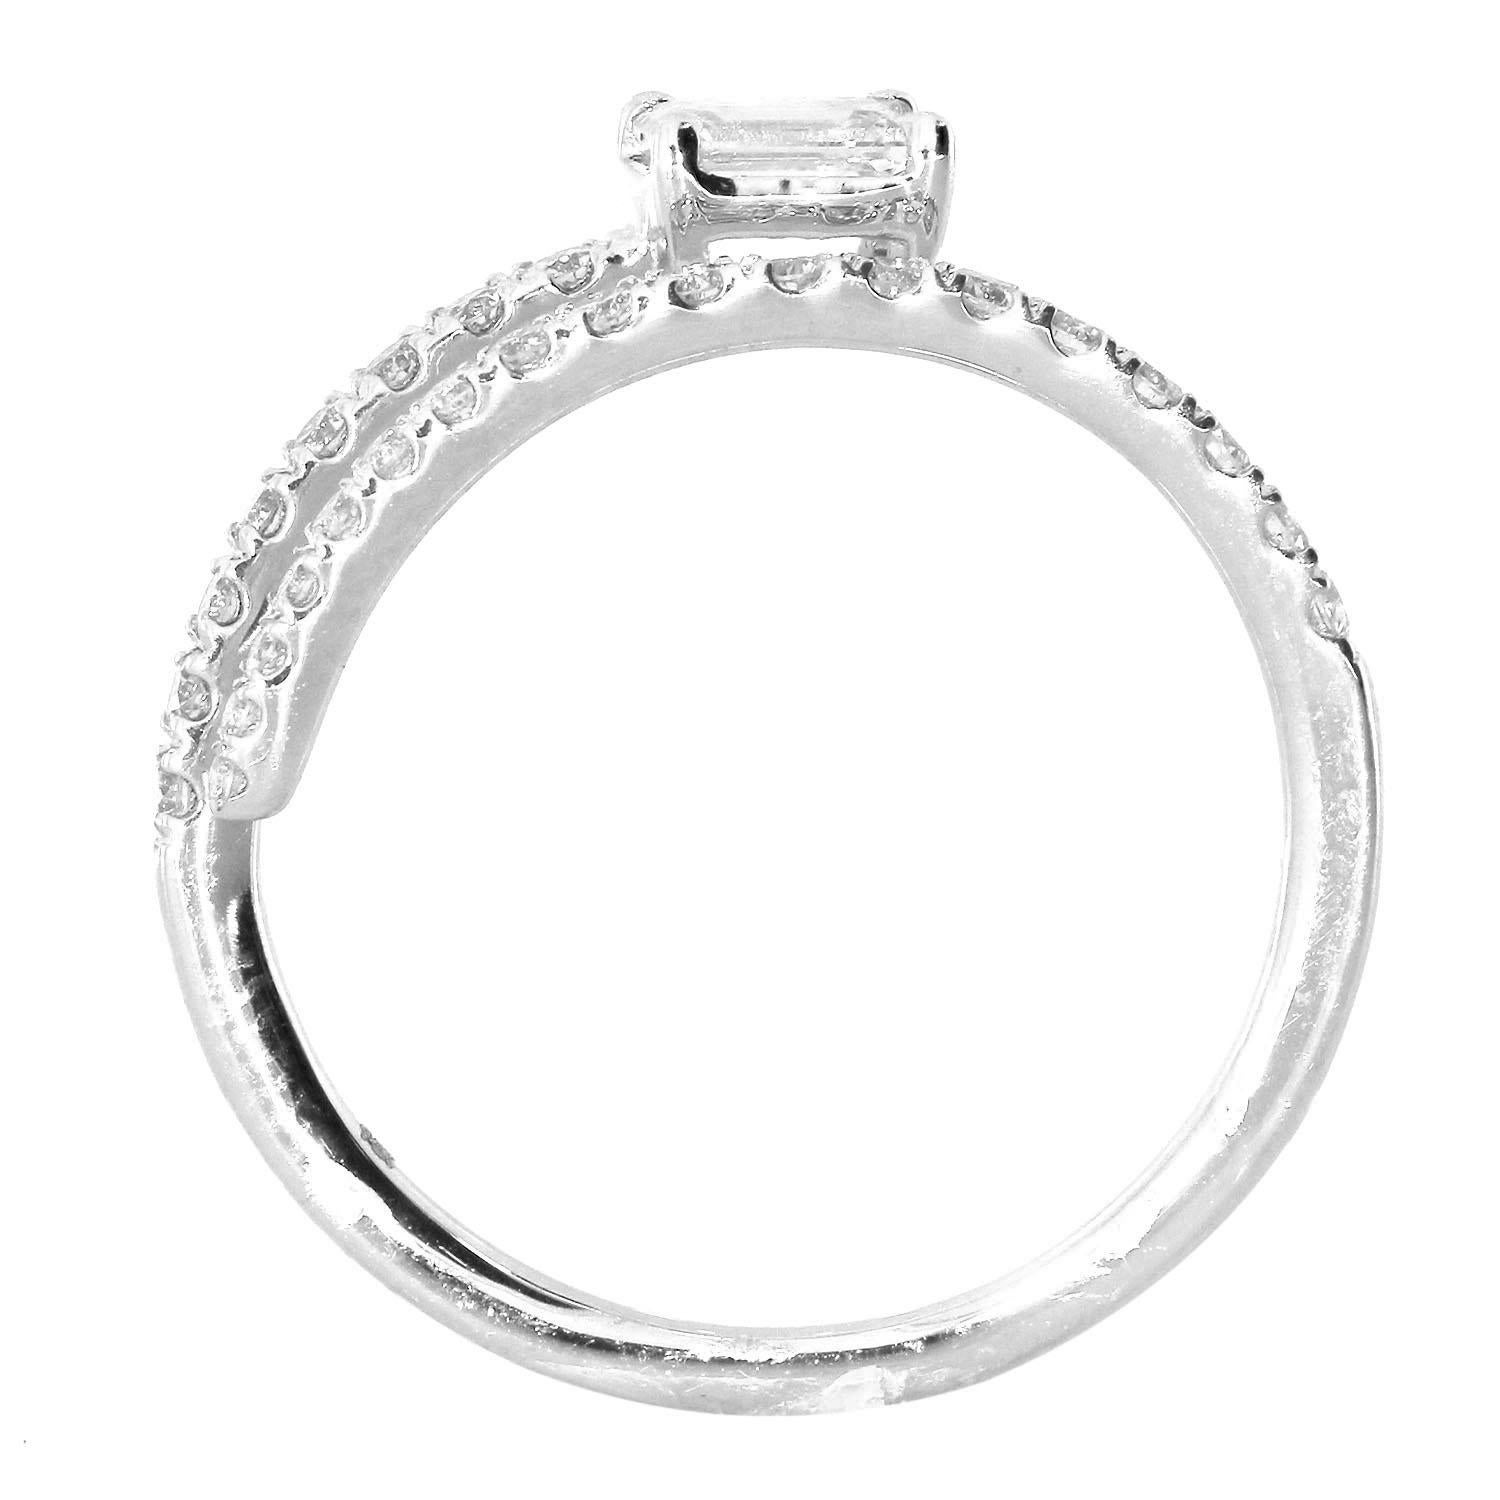 Contemporary 0.61 Ct Diamond Wrap Band Ring Made In 14k White Gold For Sale